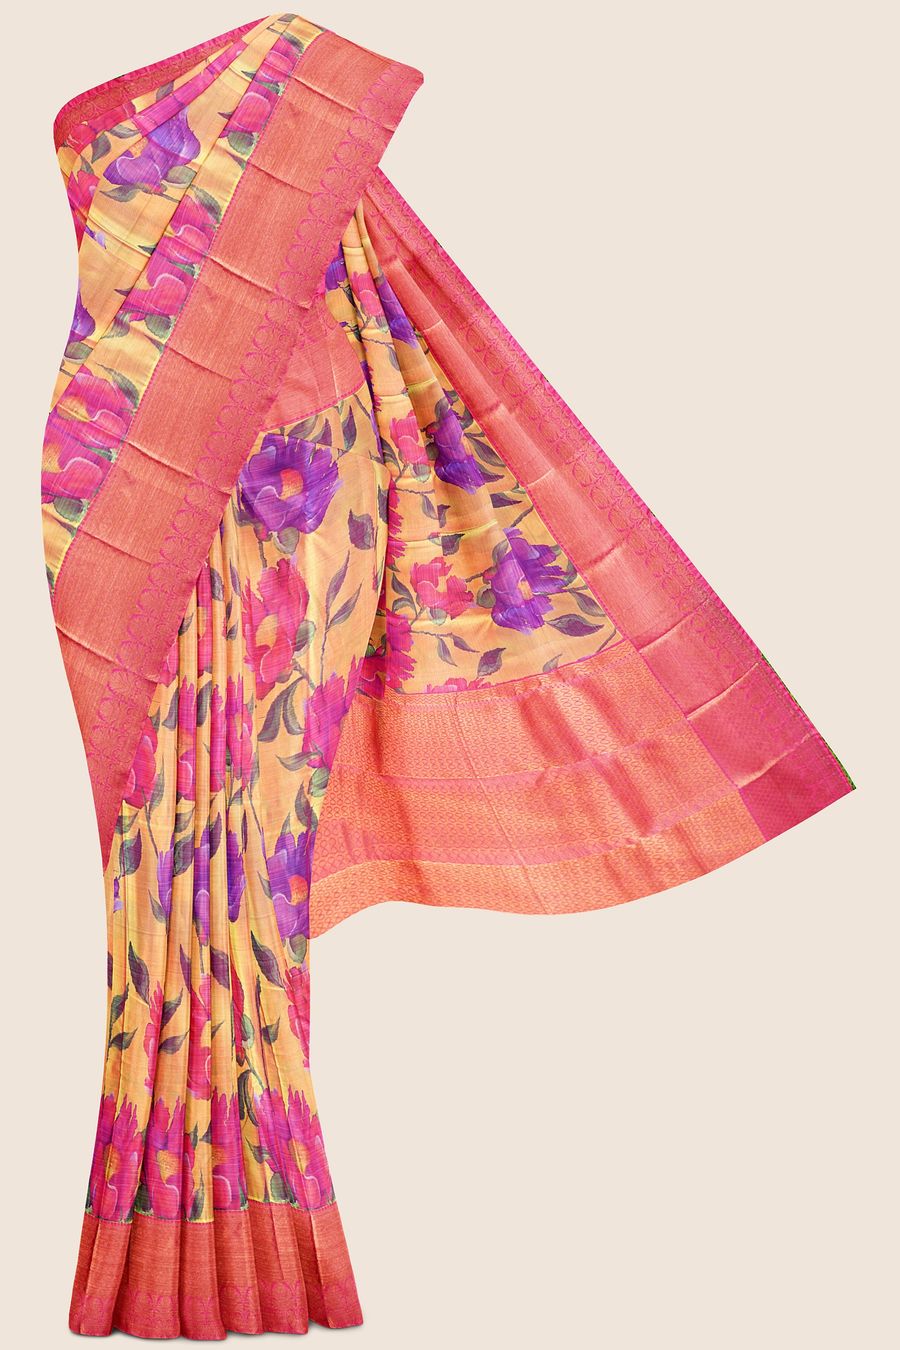 New Arrivals on Silk Sarees, Readymade Suits and Kurtis | Pothys Online